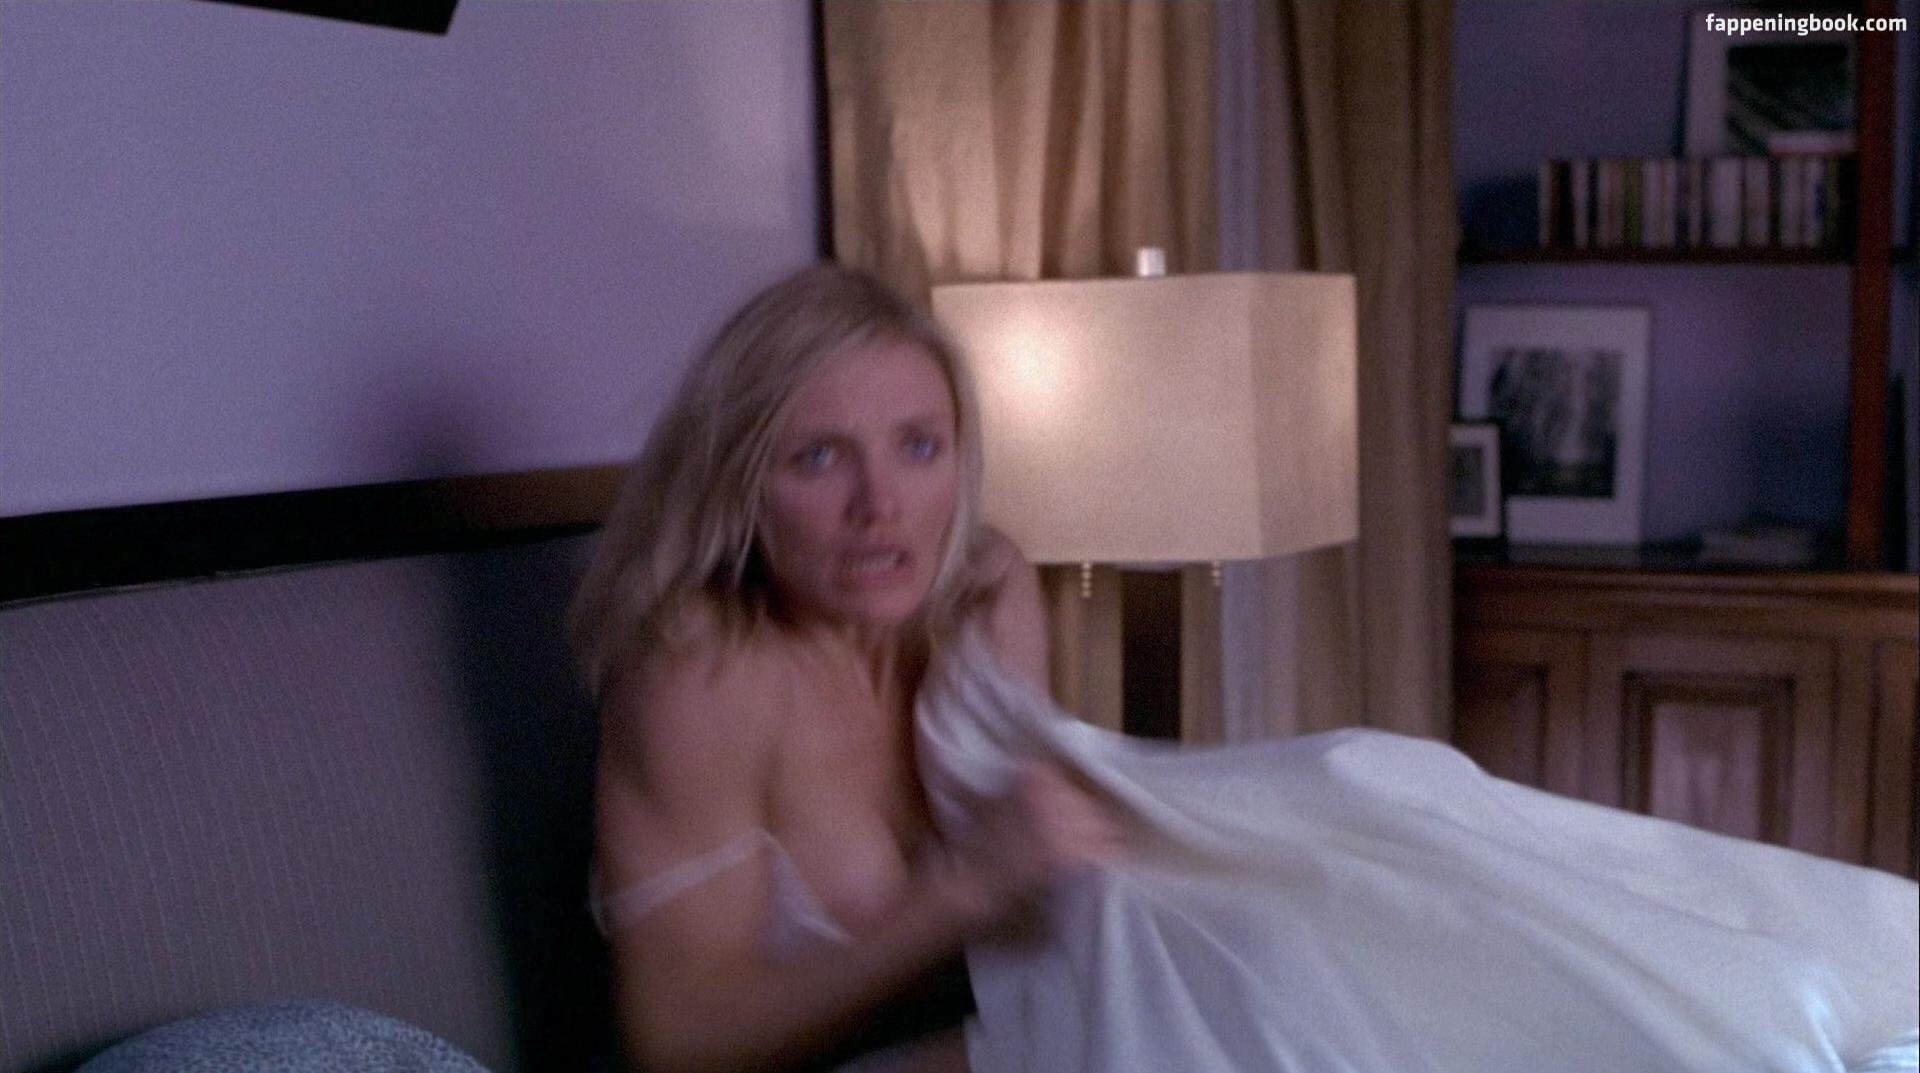 Cameron Diaz Nude, The Fappening - Photo #93412 - FappeningBook.